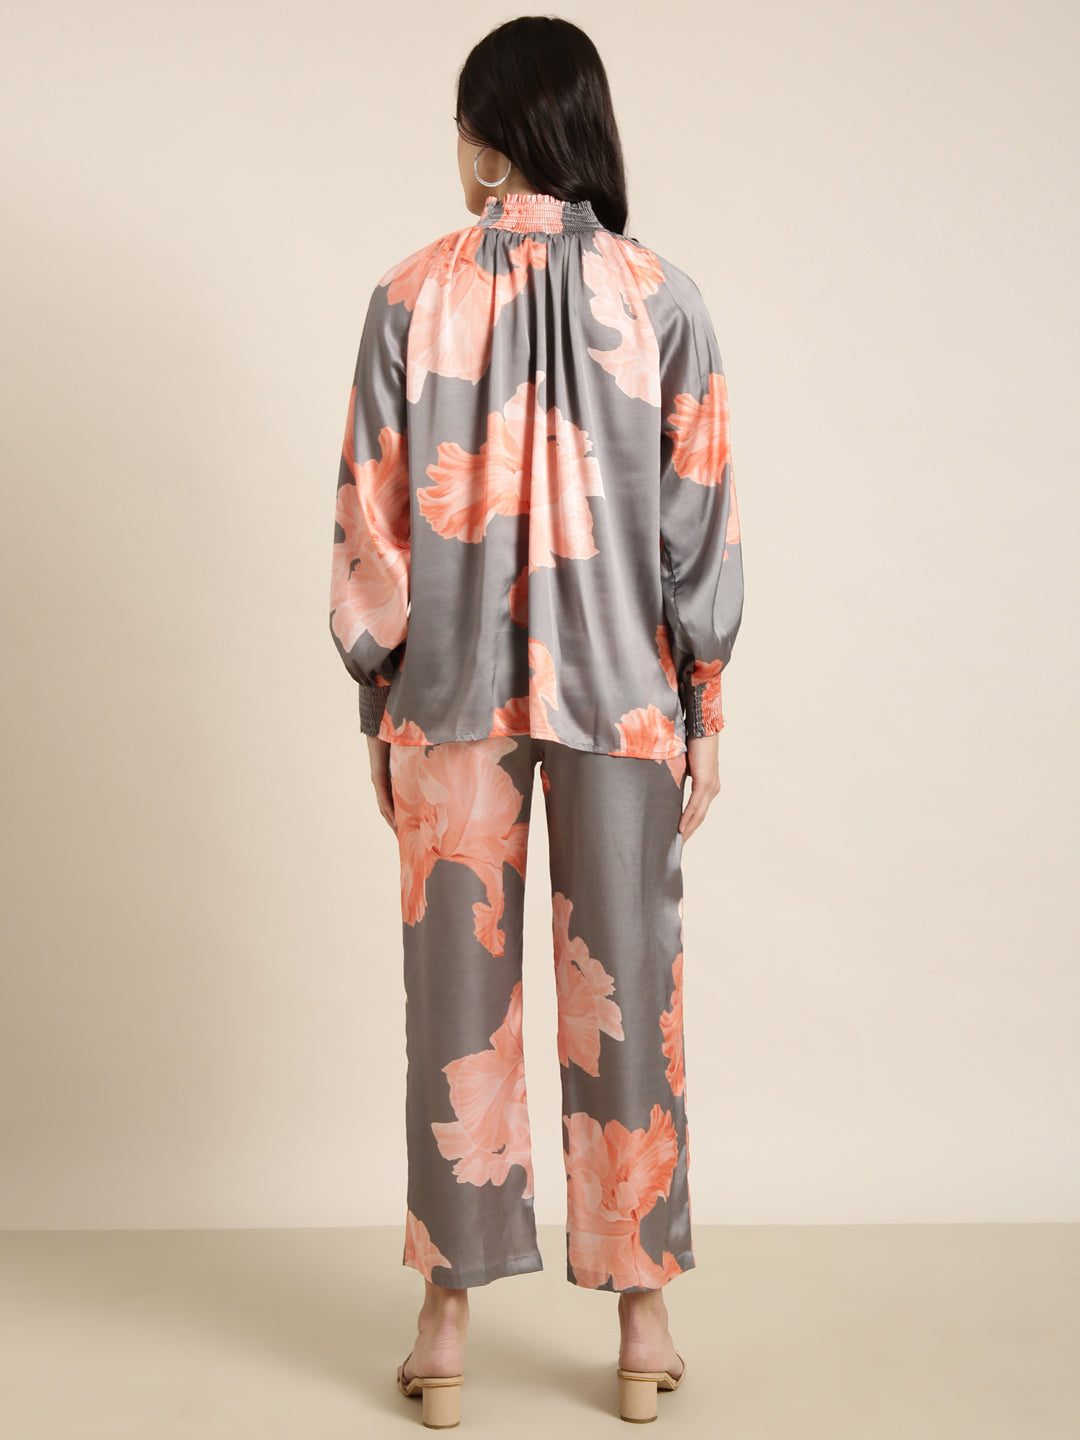 Women Oversized Grey Printed Top & Trousers Set